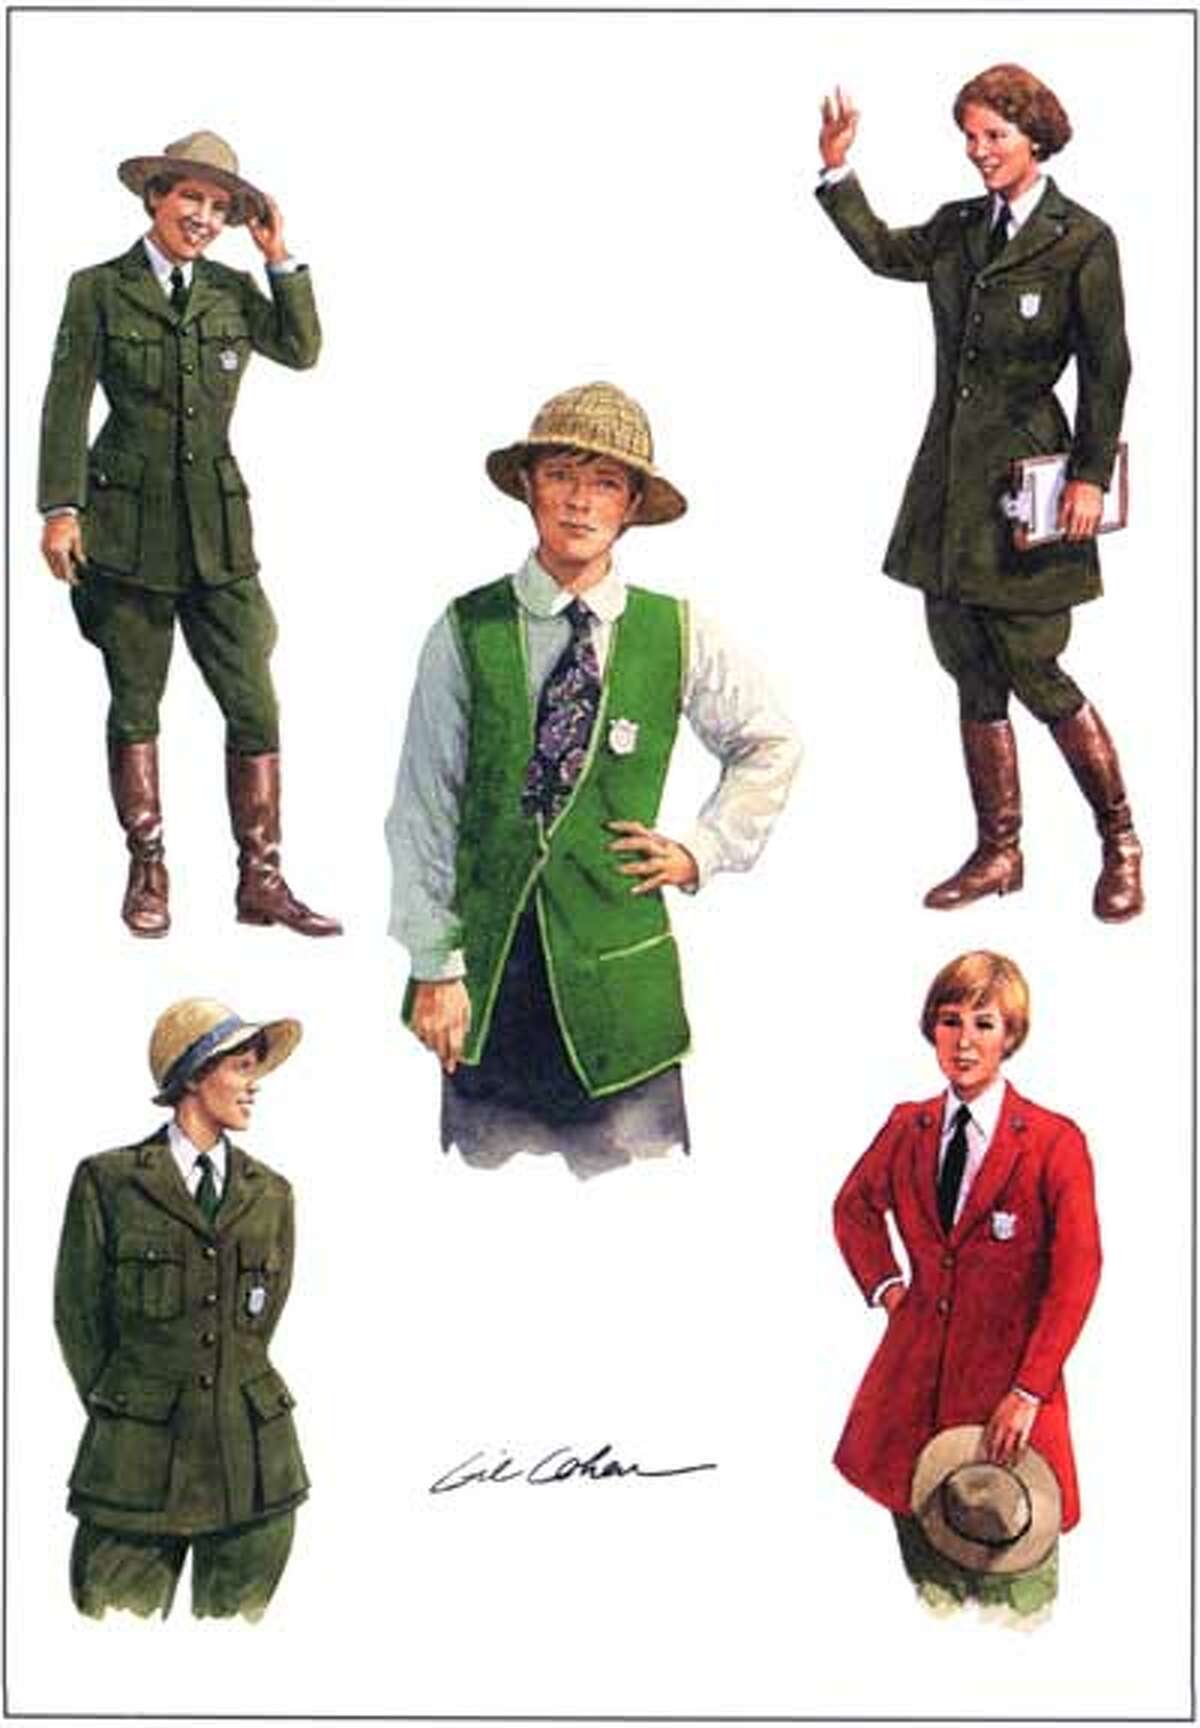 National Park Service Shares Throwback Photo Of Vintage Uniforms Women Wore